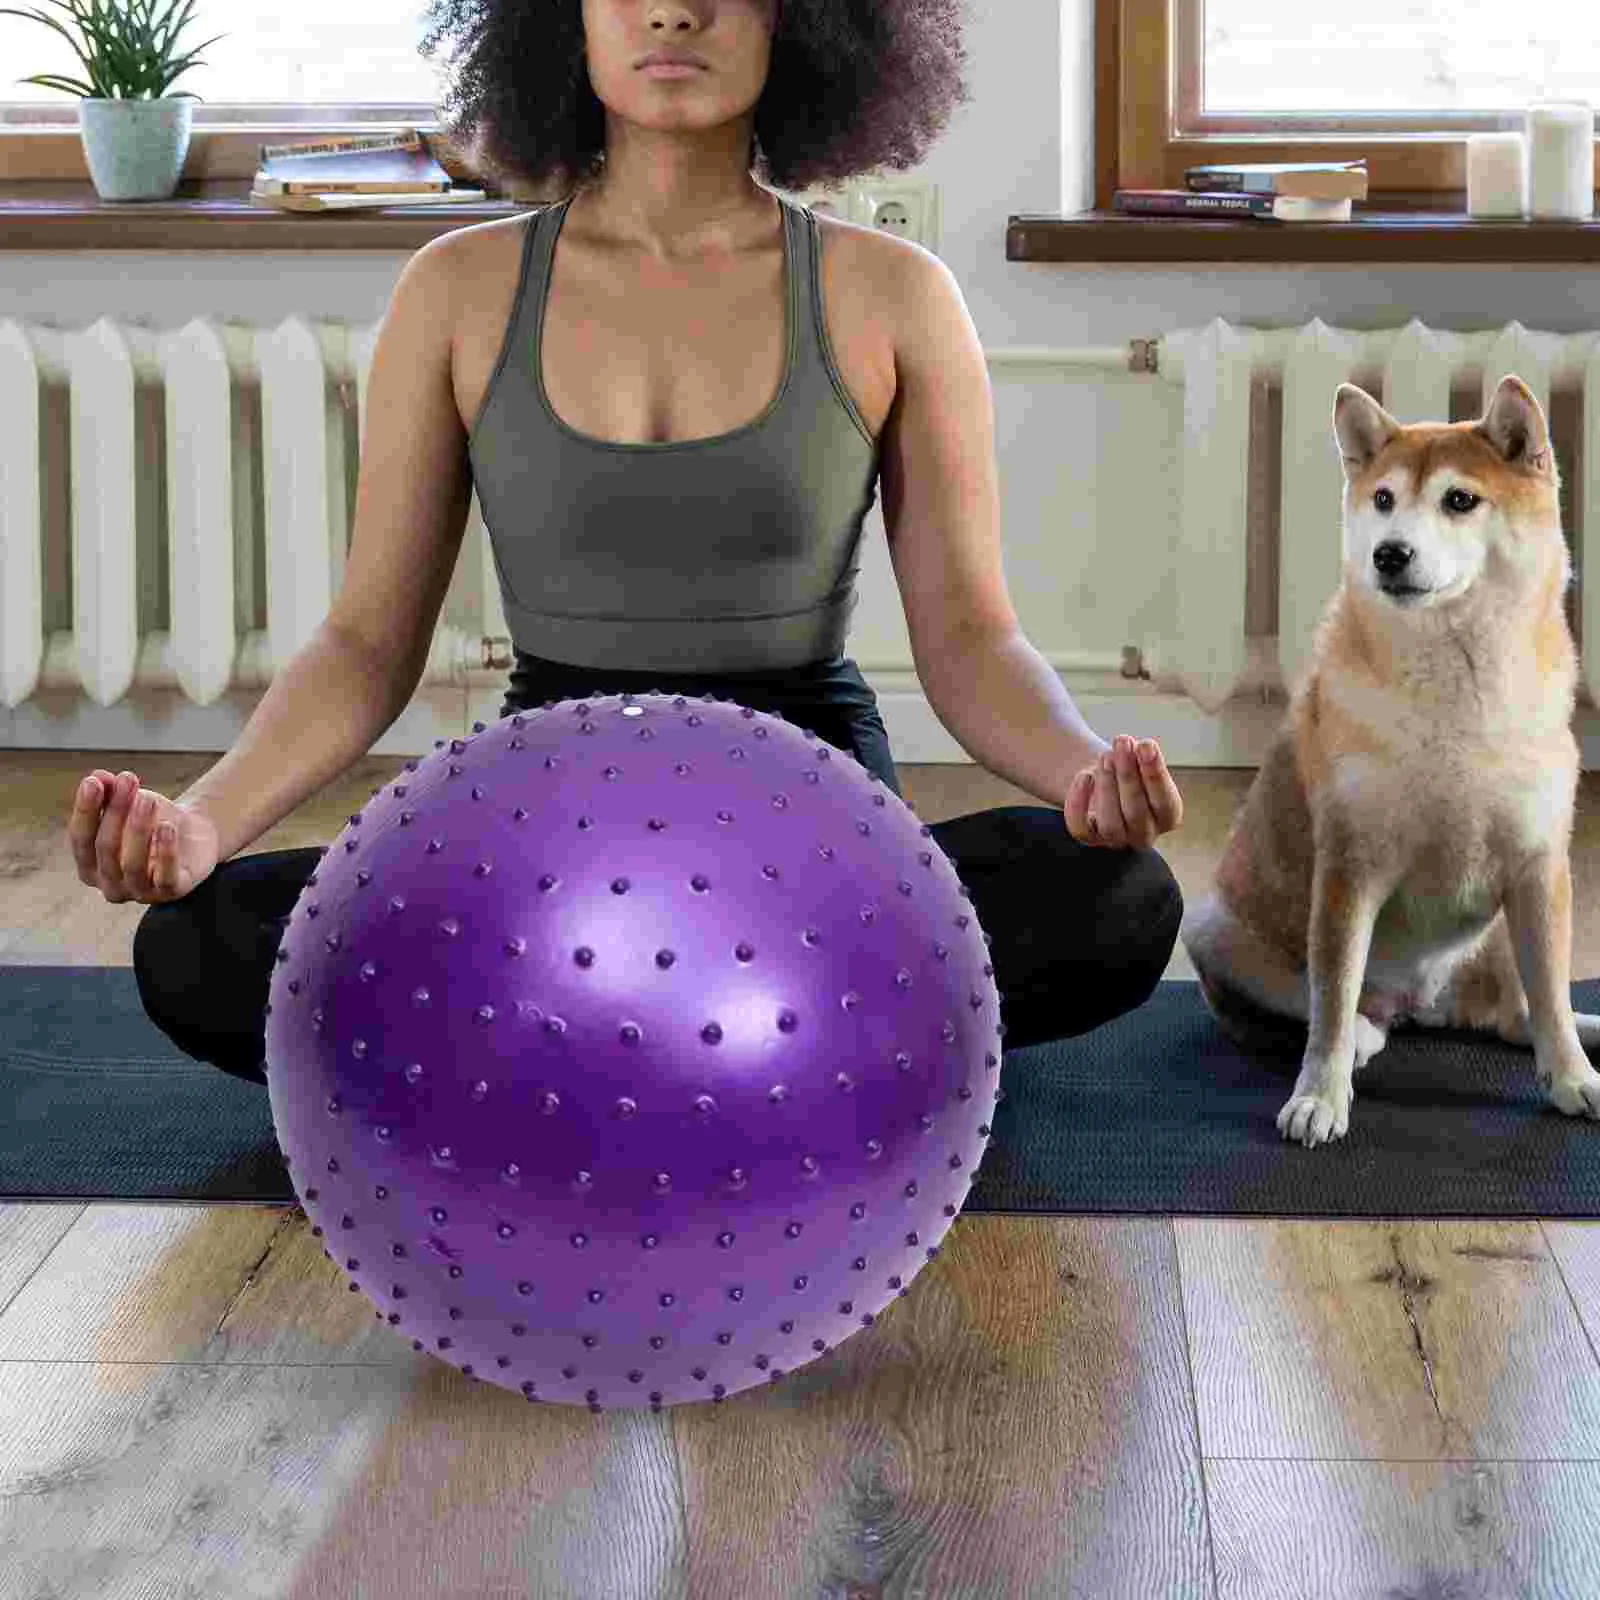 

Birthing Ball Workout Balls Exercise Stability Chair Massage Pregnancy Gym Yoga Pilates Fitness